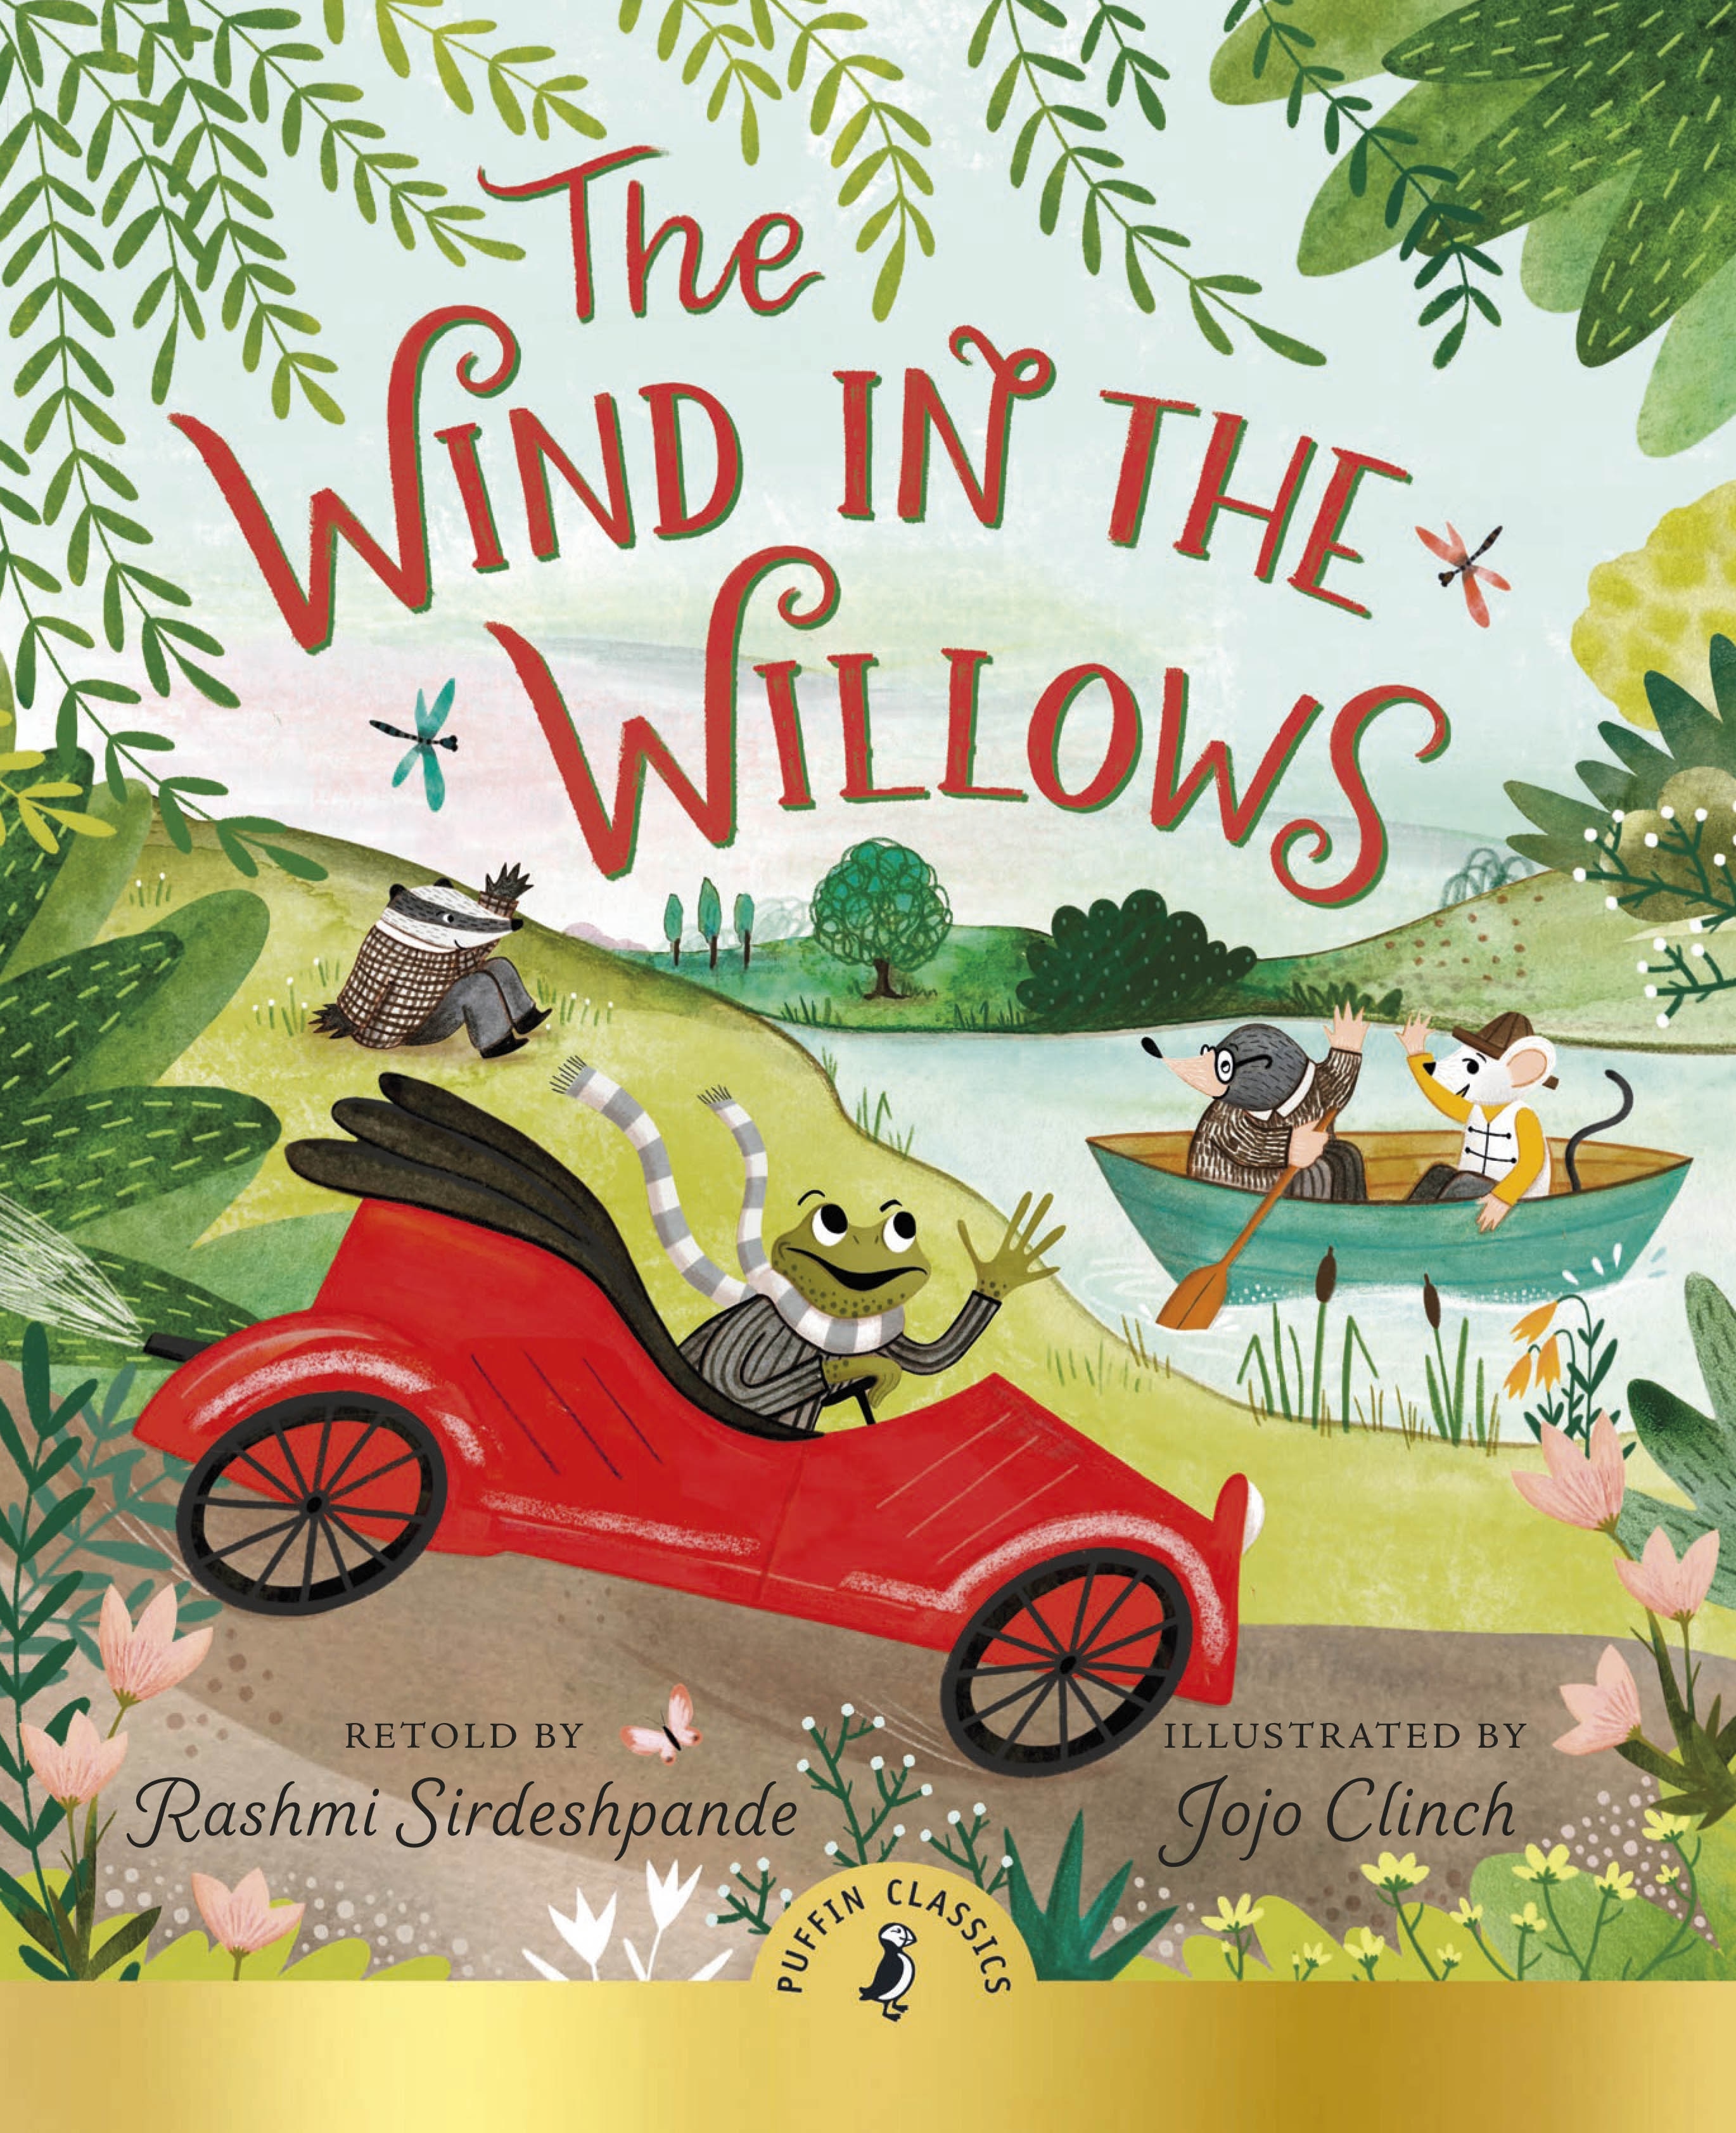 Book “The Wind In The Willows” by Rashmi Sirdeshpande — April 14, 2022